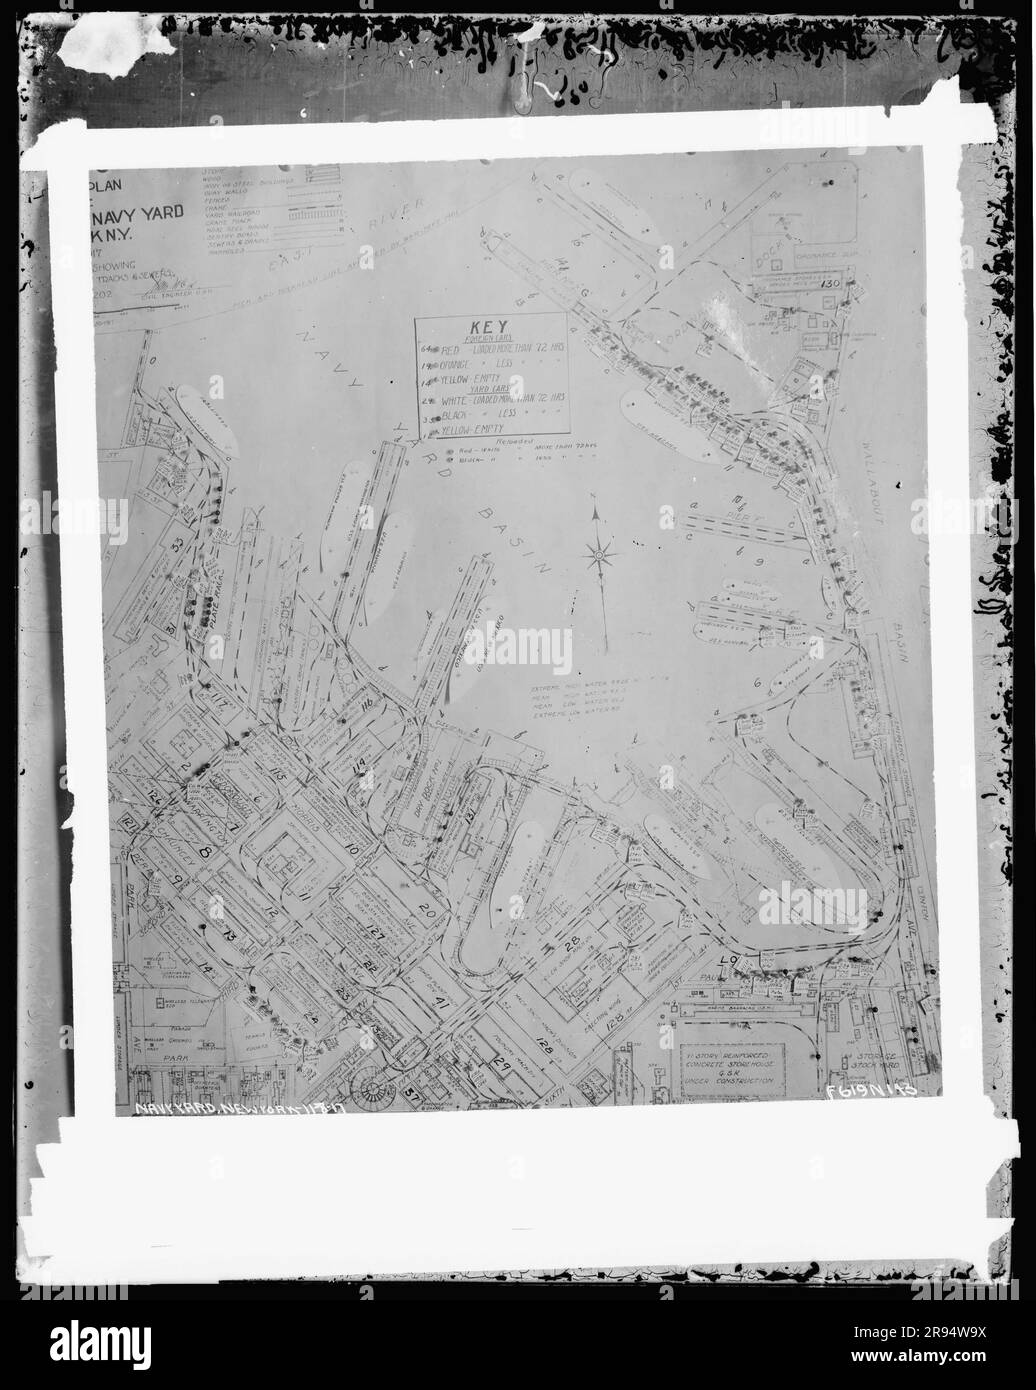 Drawing: Plan of Navy Yard Showing Railroad Tracks and Sewers. Glass Plate Negatives of the Construction and Repair of Buildings, Facilities, and Vessels at the New York Navy Yard. Stock Photo